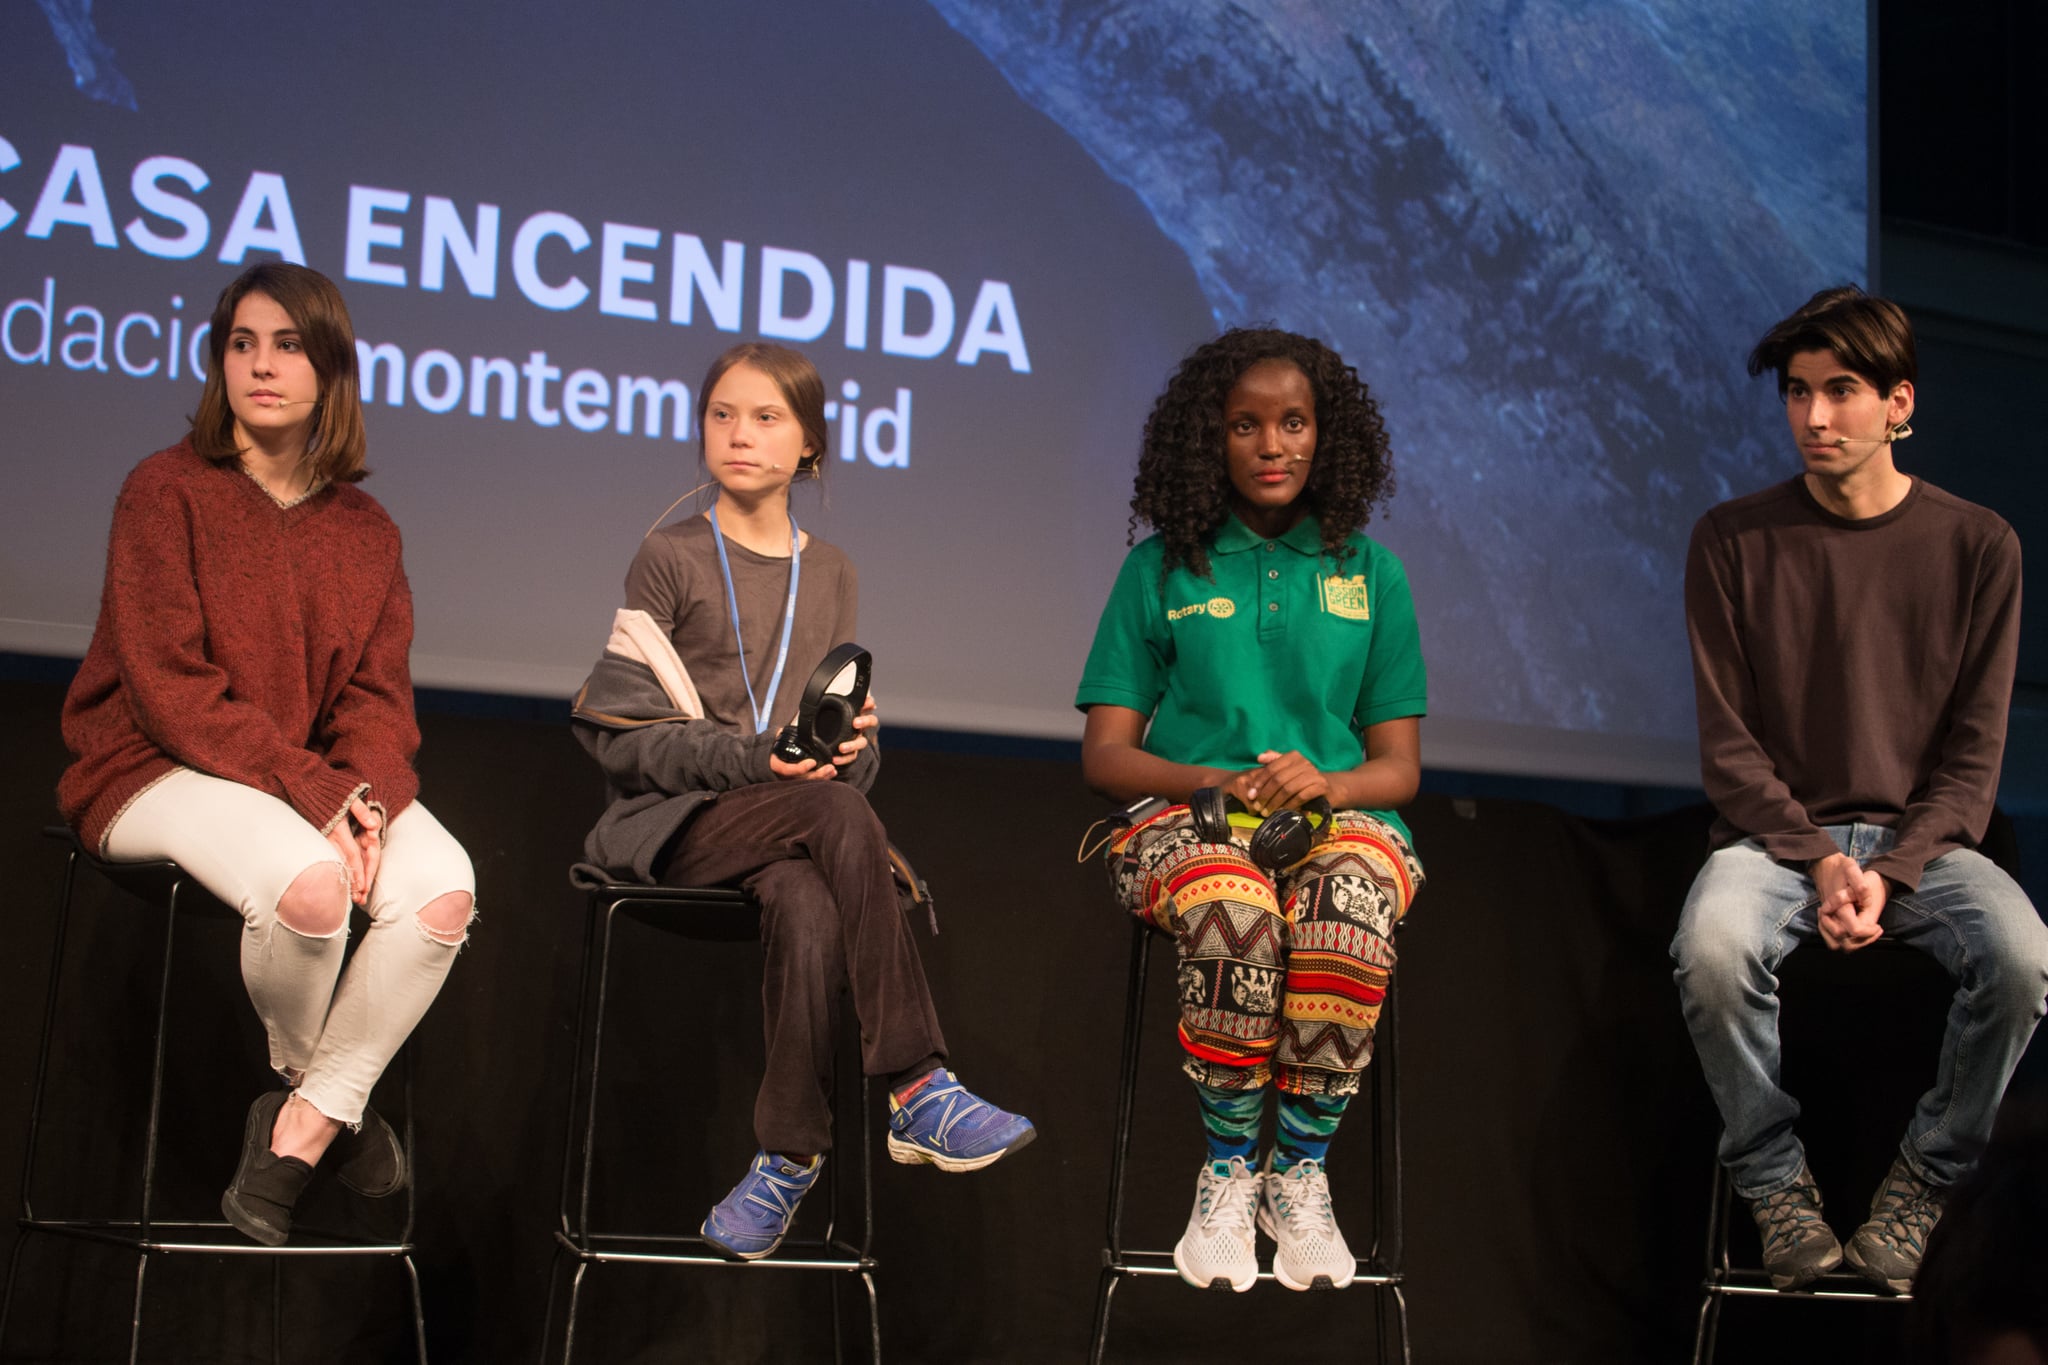 MADRID, SPAIN - 2019/12/06: From left to right, Shari Crepi (Fridays for Future Spain), Greta Thunberg (Fridays for Future Sweden), Vanessa Nakate (Fridays for Future Uganda) and Alejandro Martinez (Fridays for Future International Spain) attend a press conference.Press conference of the Swedish activist of Fridays for Future, climate change, Greta Thunberg after participating in the COP25 in Madrid before the climate change protest. (Photo by Lito Lizana/SOPA Images/LightRocket via Getty Images)